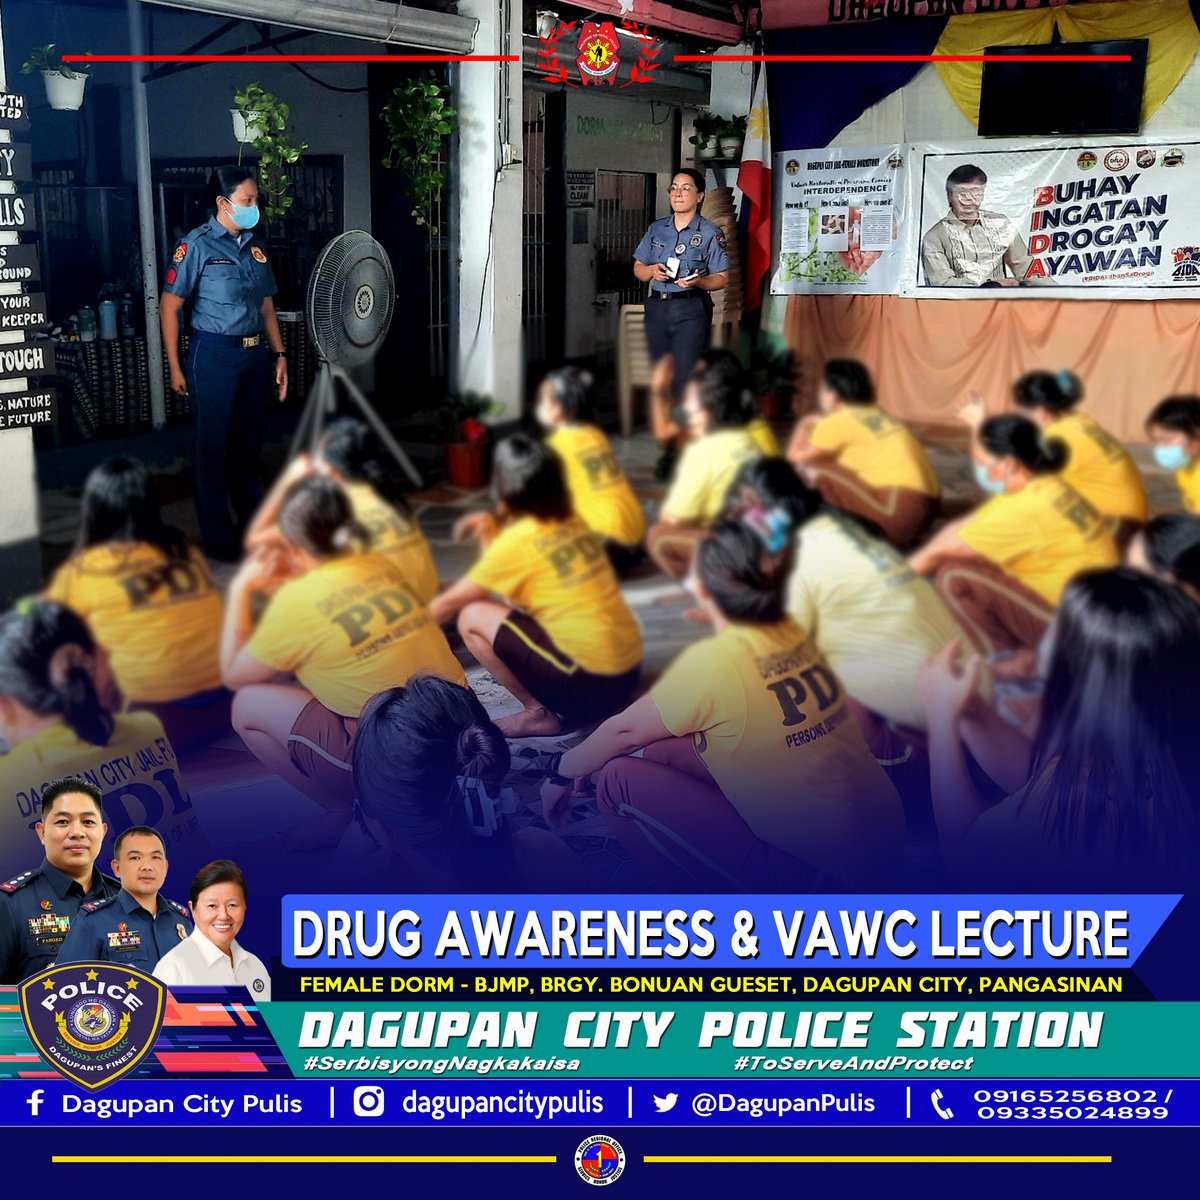 Personnel of Dagupan City Police Station, under the direct supervision of PLTCOL BRENDON B PALISOC, OIC, conducted a lecture on drug awareness and VAWC for the Person Deprived of Liberty (PDL) after the Joint Greyhound Operation at BJMP-Female Dorm, Bonuan Gueset, Dagupan City.